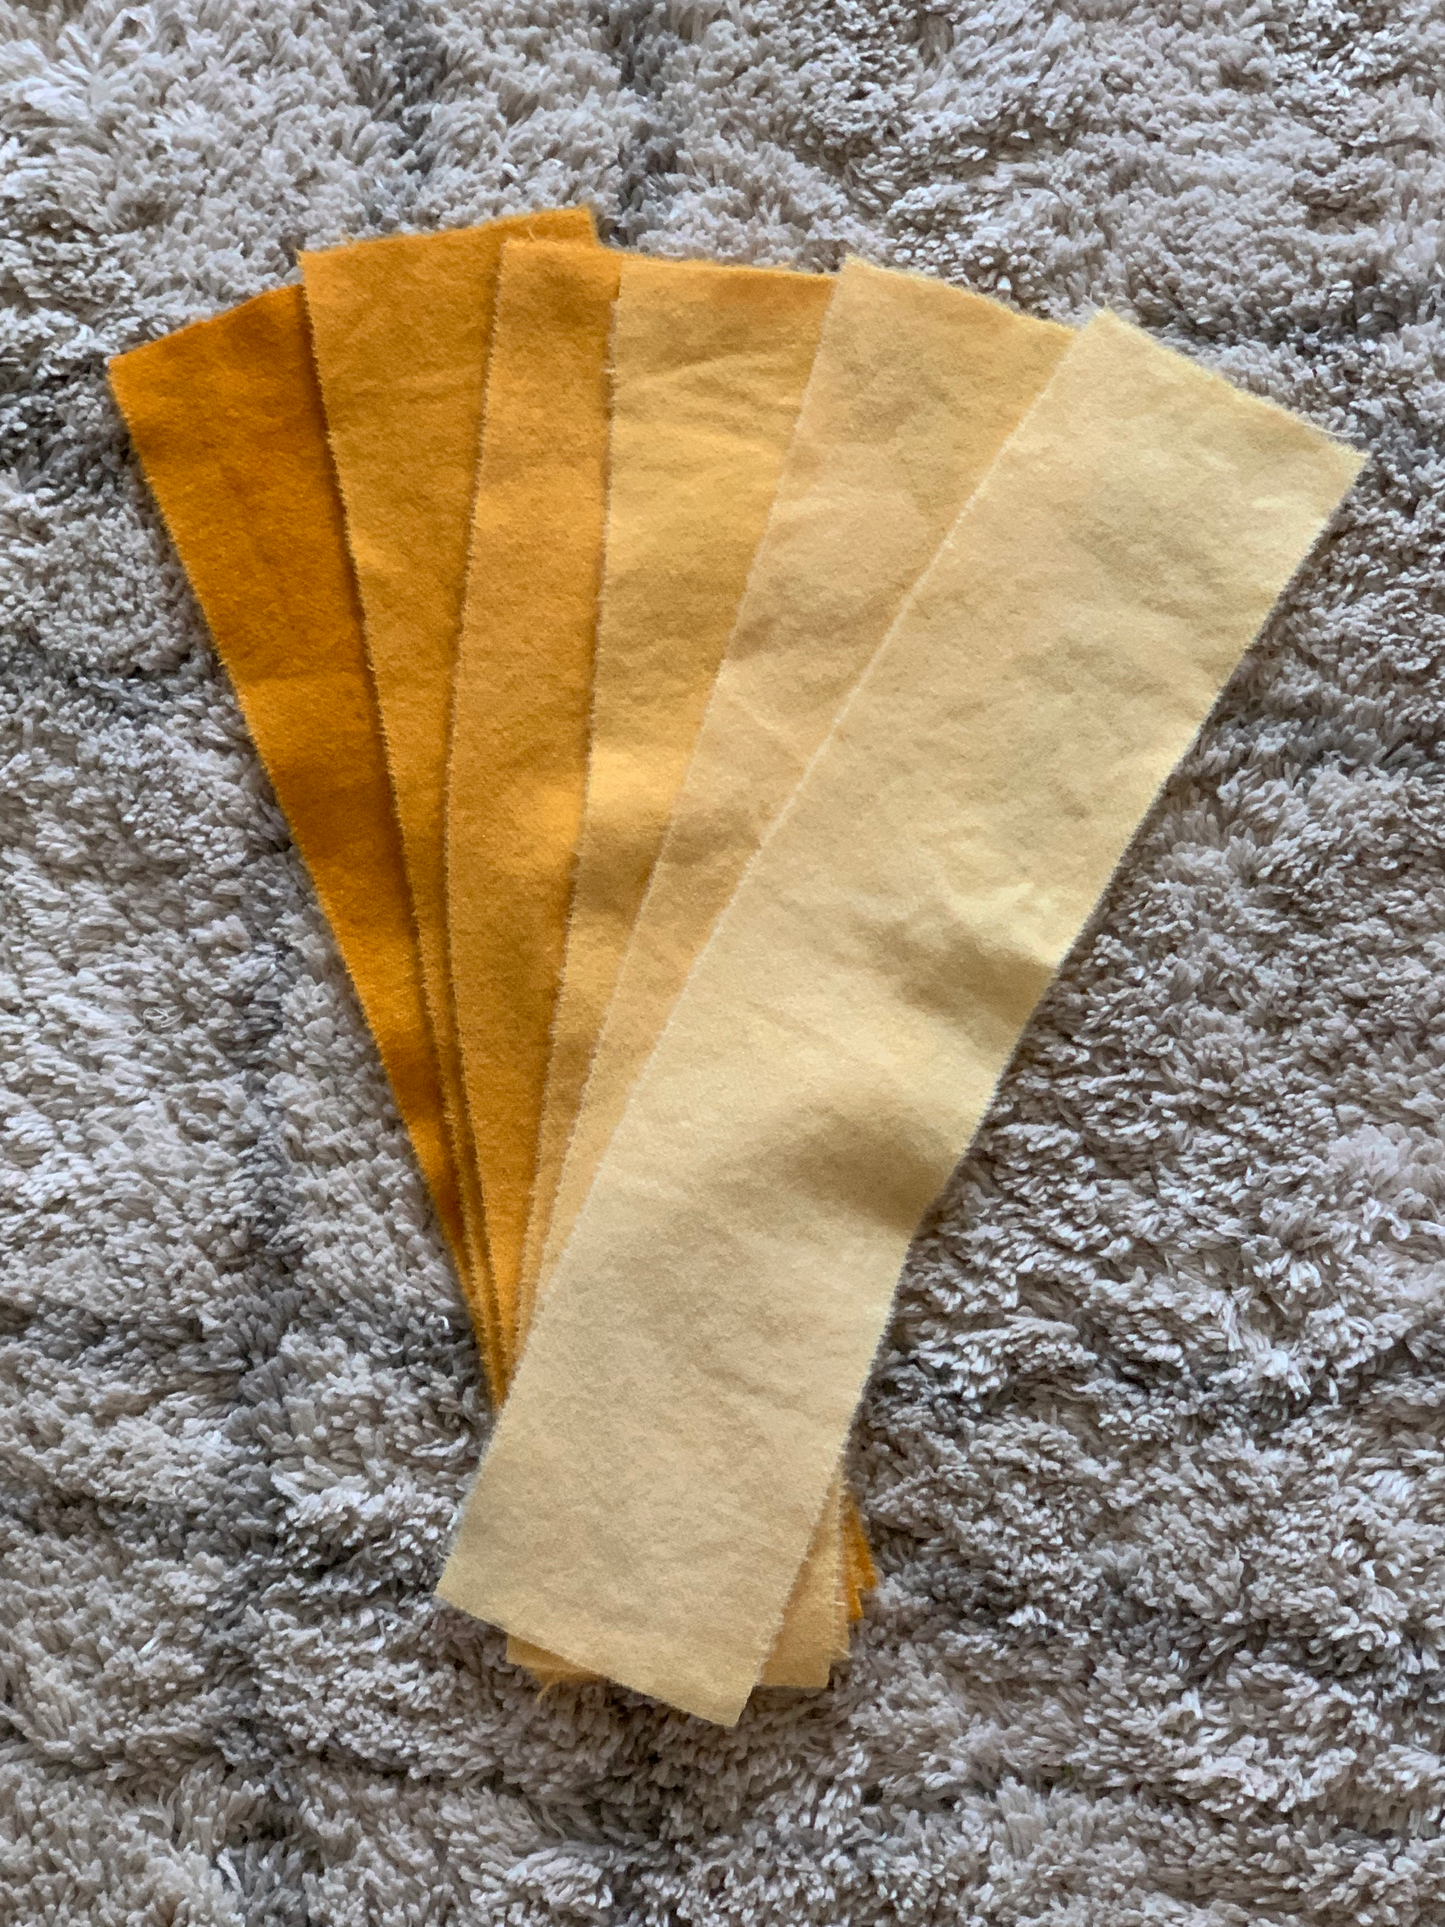 Golden Yellow 6 Value Swatches Studio Dyed Wool